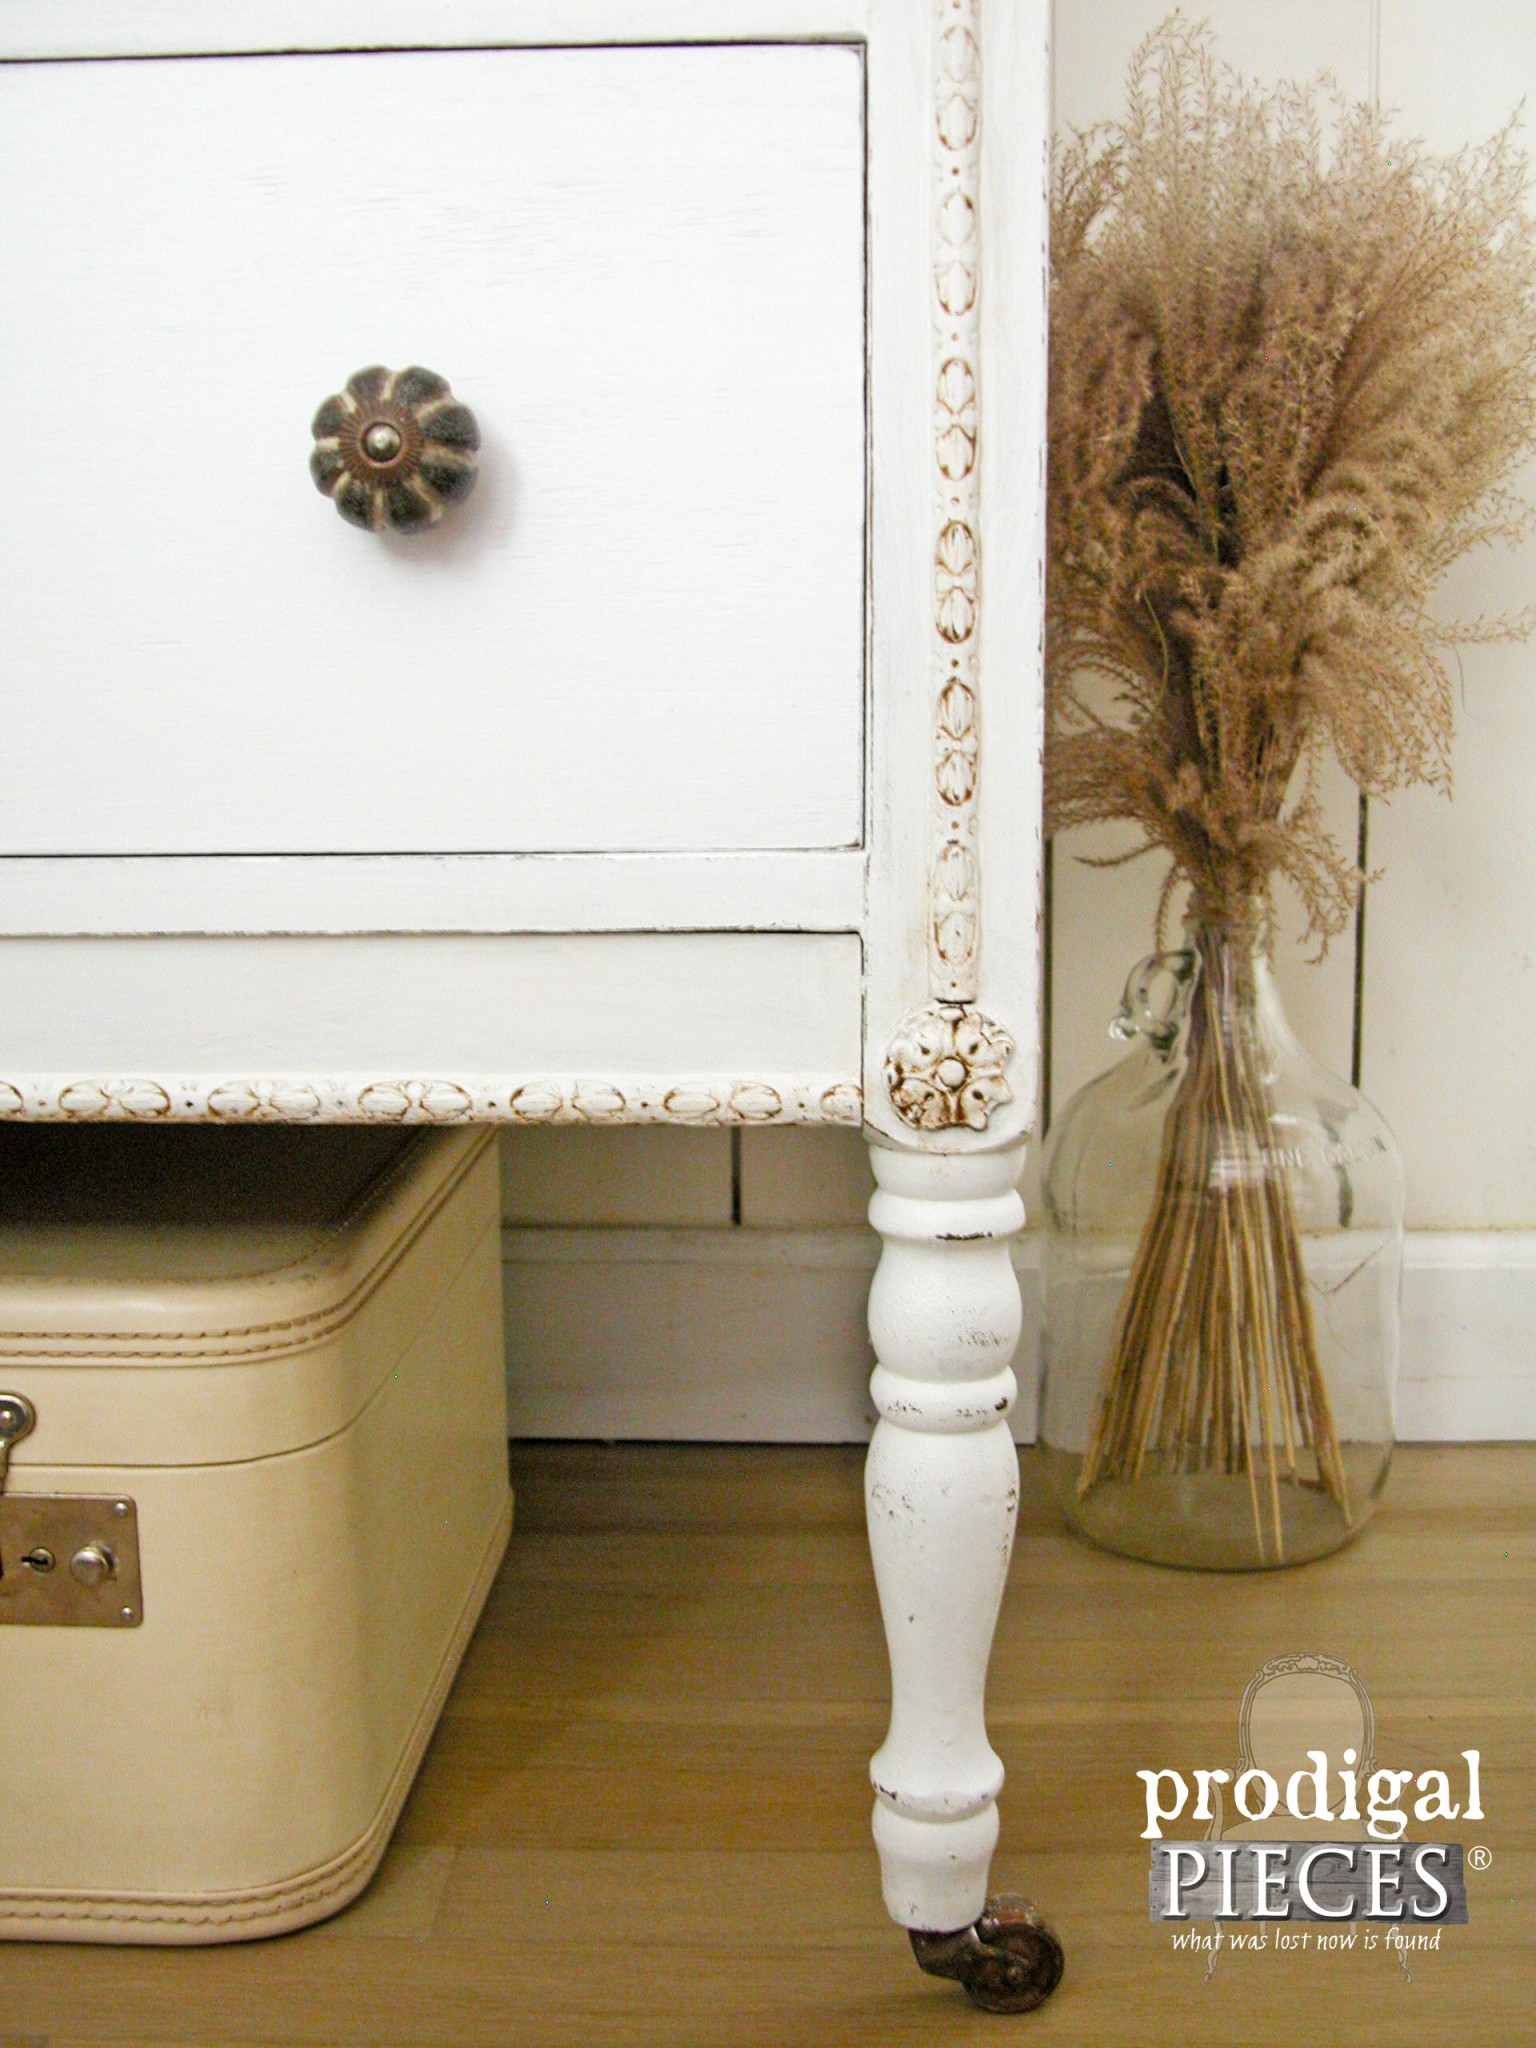 Ornate Details Drawn Our with Dark Wax and Feature Rustic Brands Knobs by Prodigal Pieces | www.prodigalpieces.com